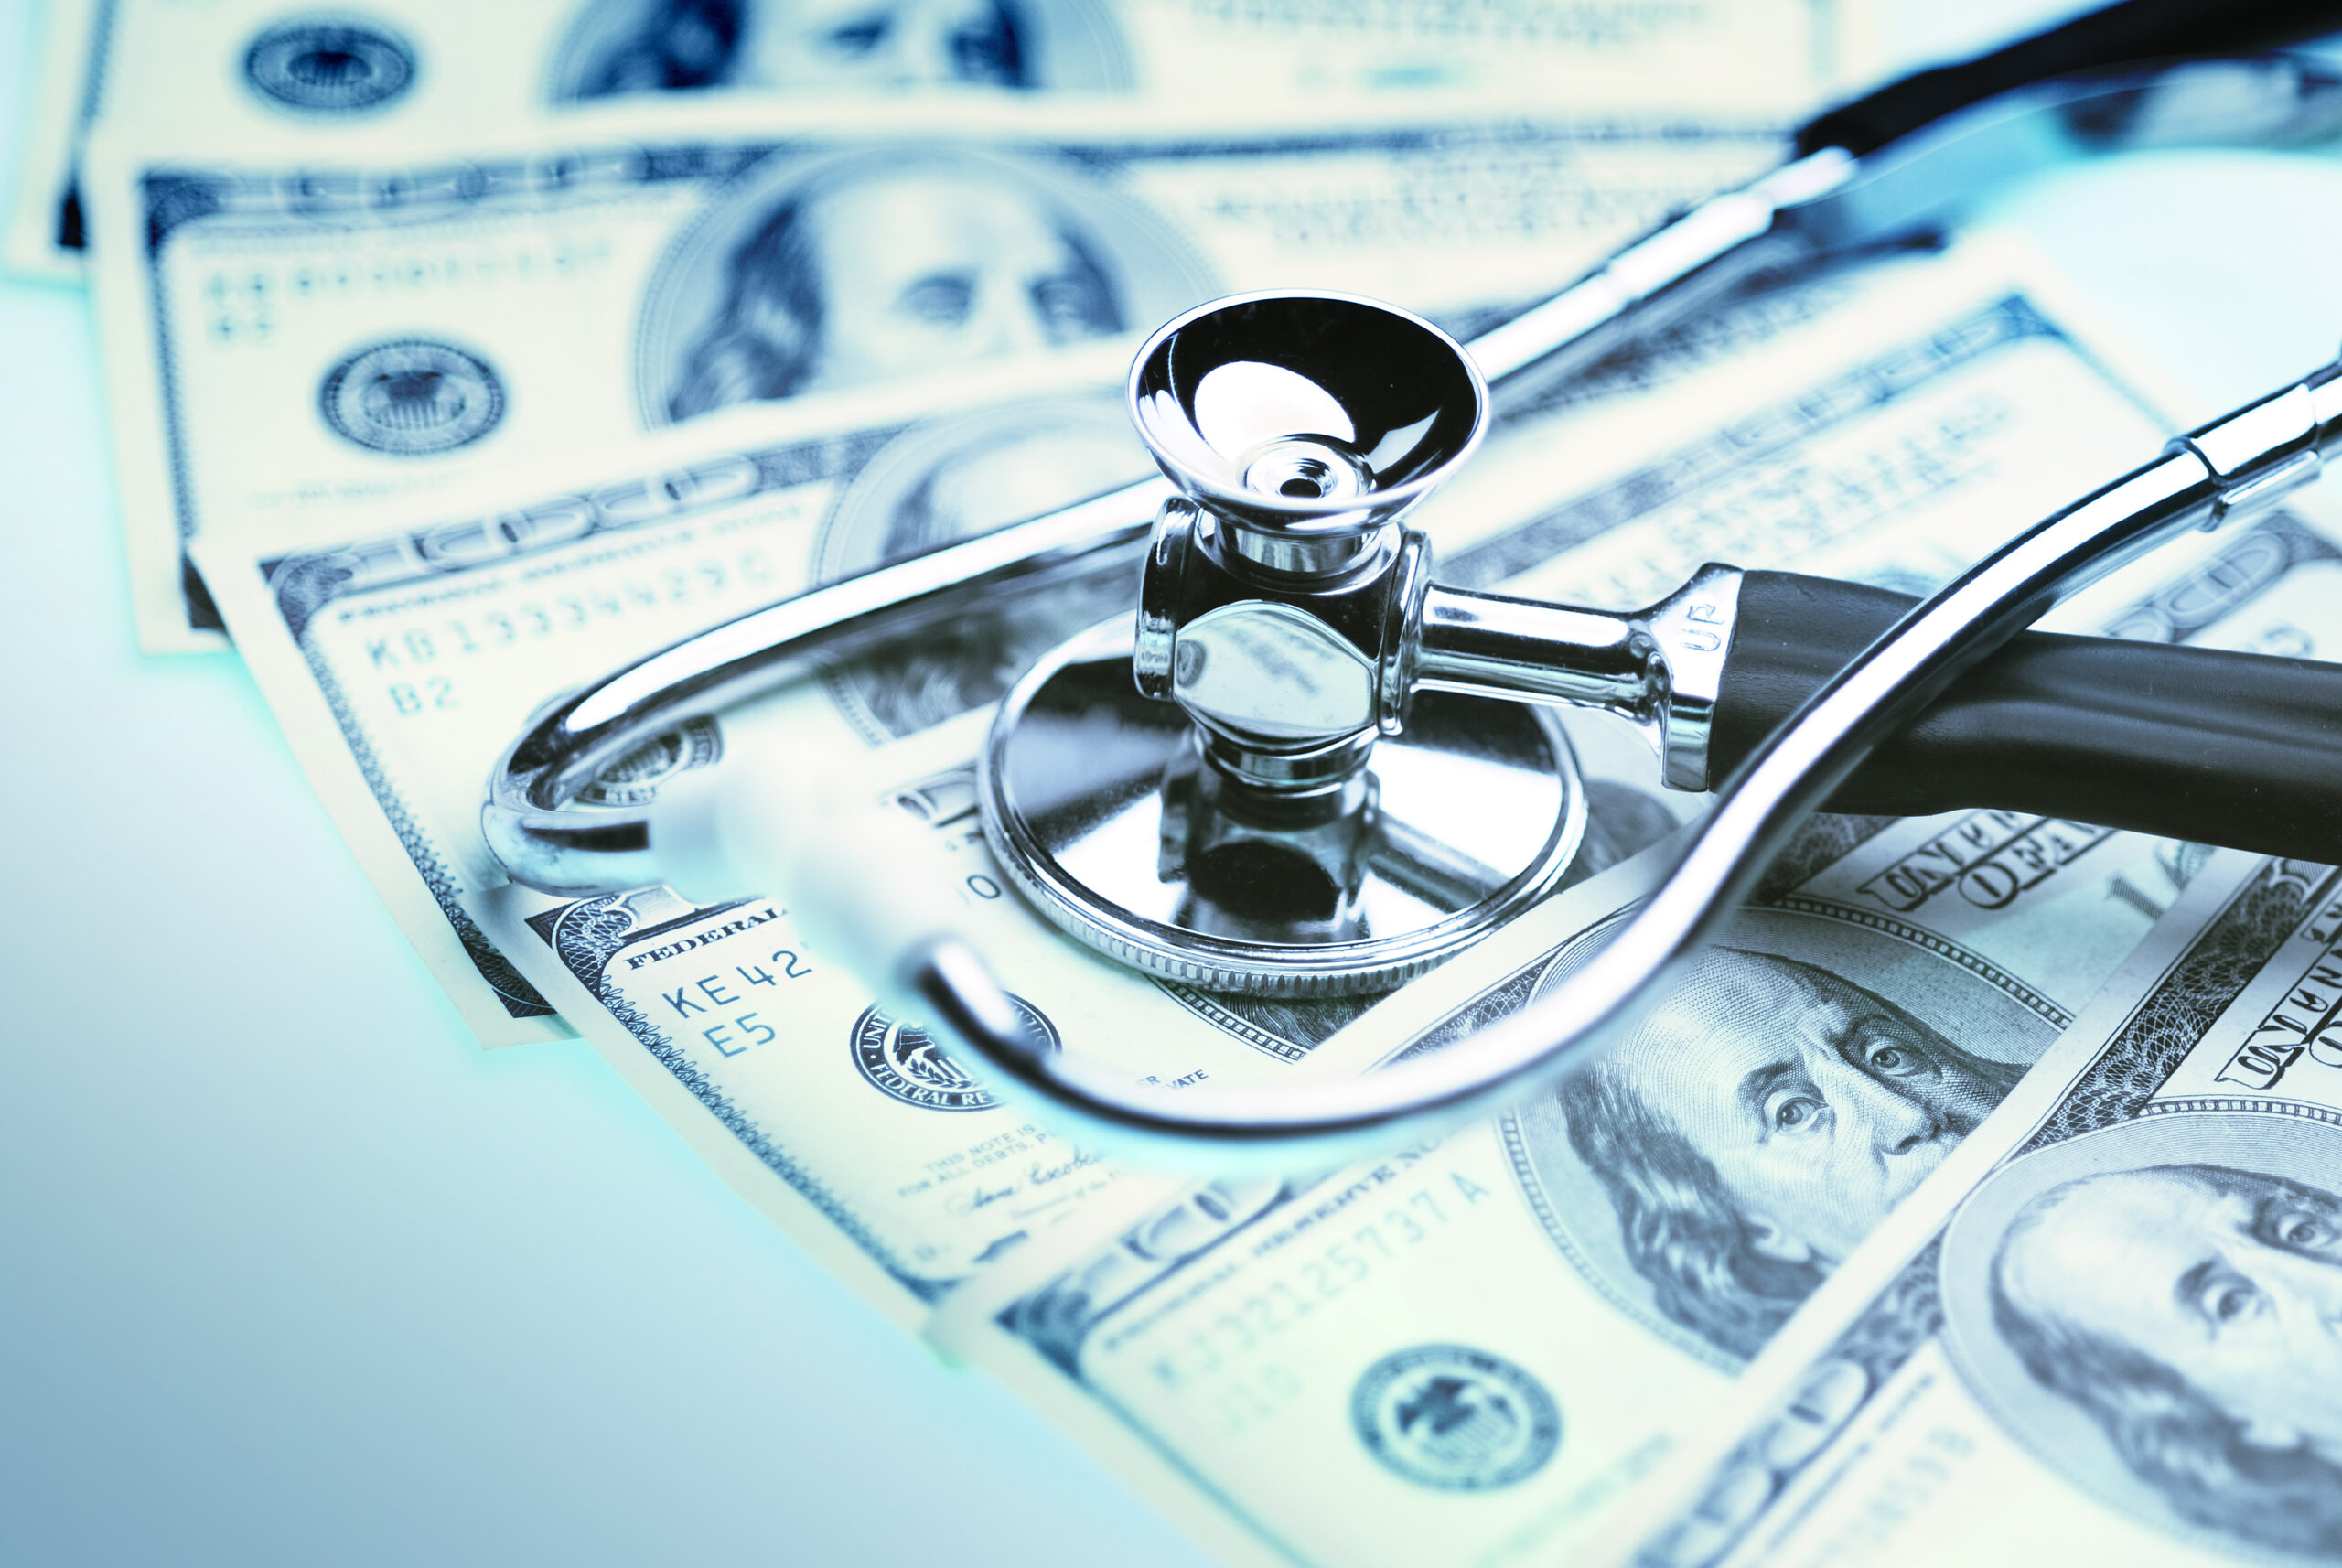 Alternative Payment Models Made Simple: Accountable Care Organizations (Part 5 of 6)